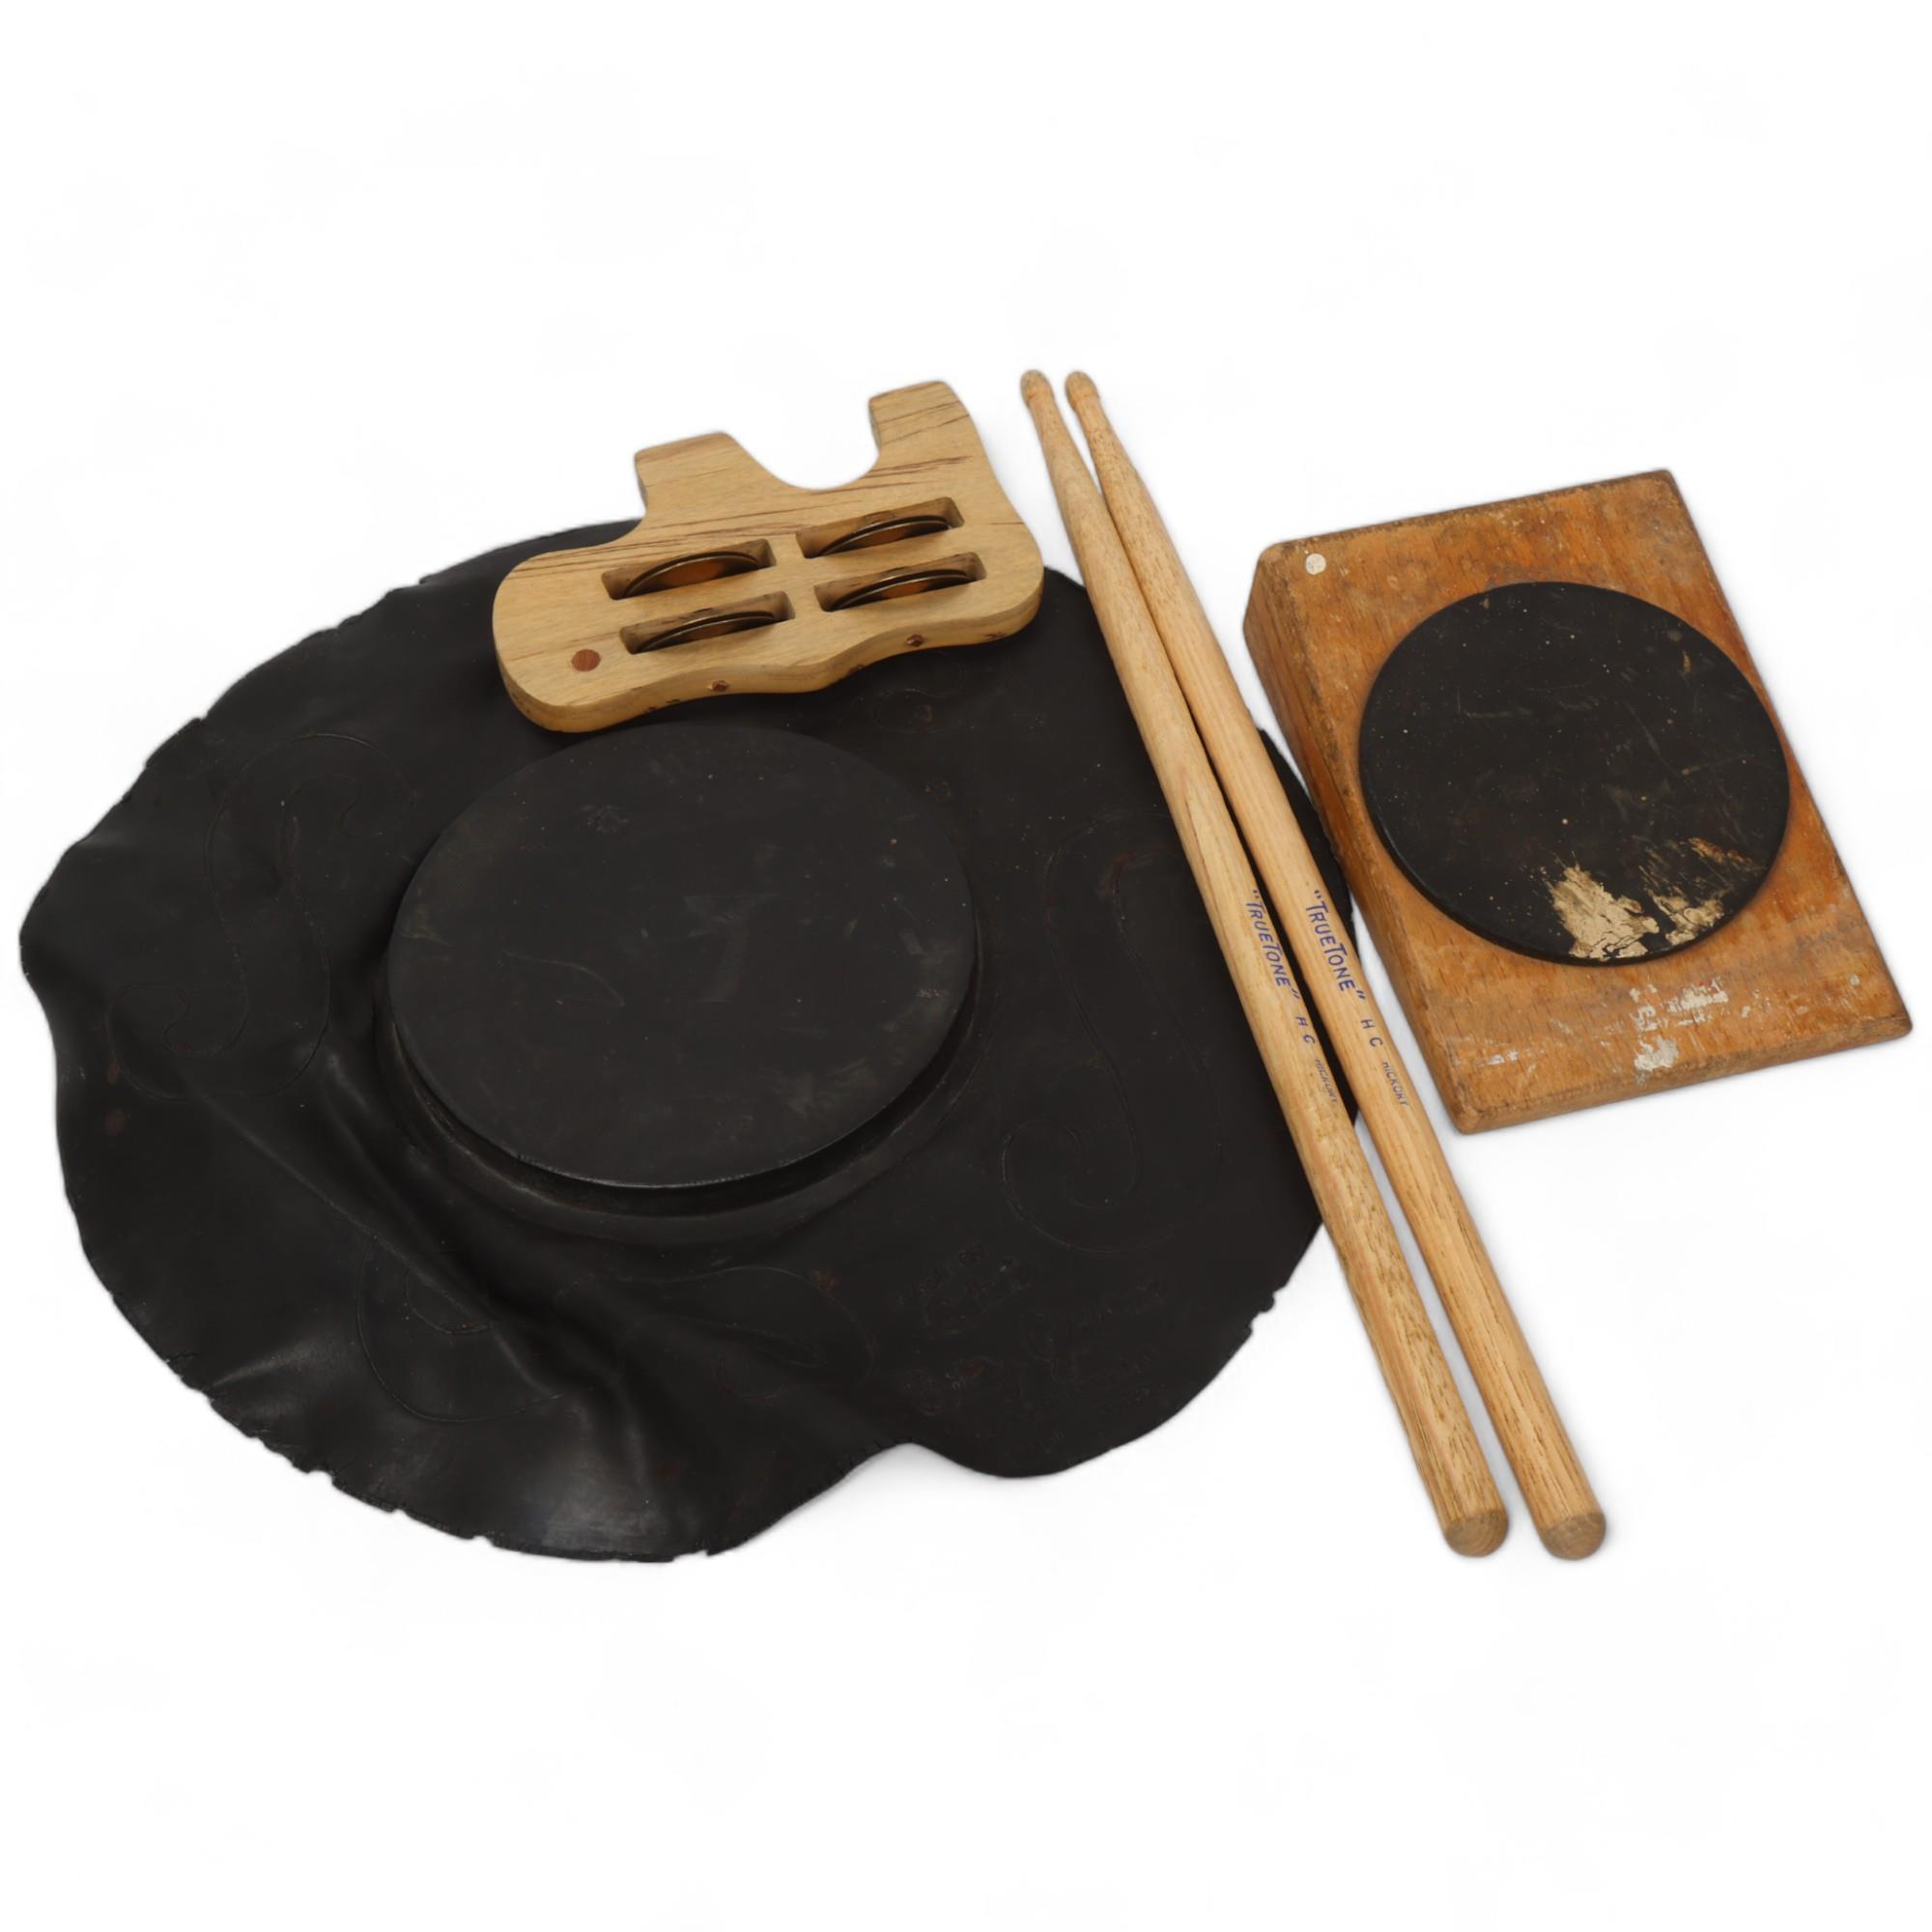 Two Practice DRUM PADS, two USED 'TRUETONE' DRUM STICKS and an ELEPHANT TAMBOURINE owned by MITCH